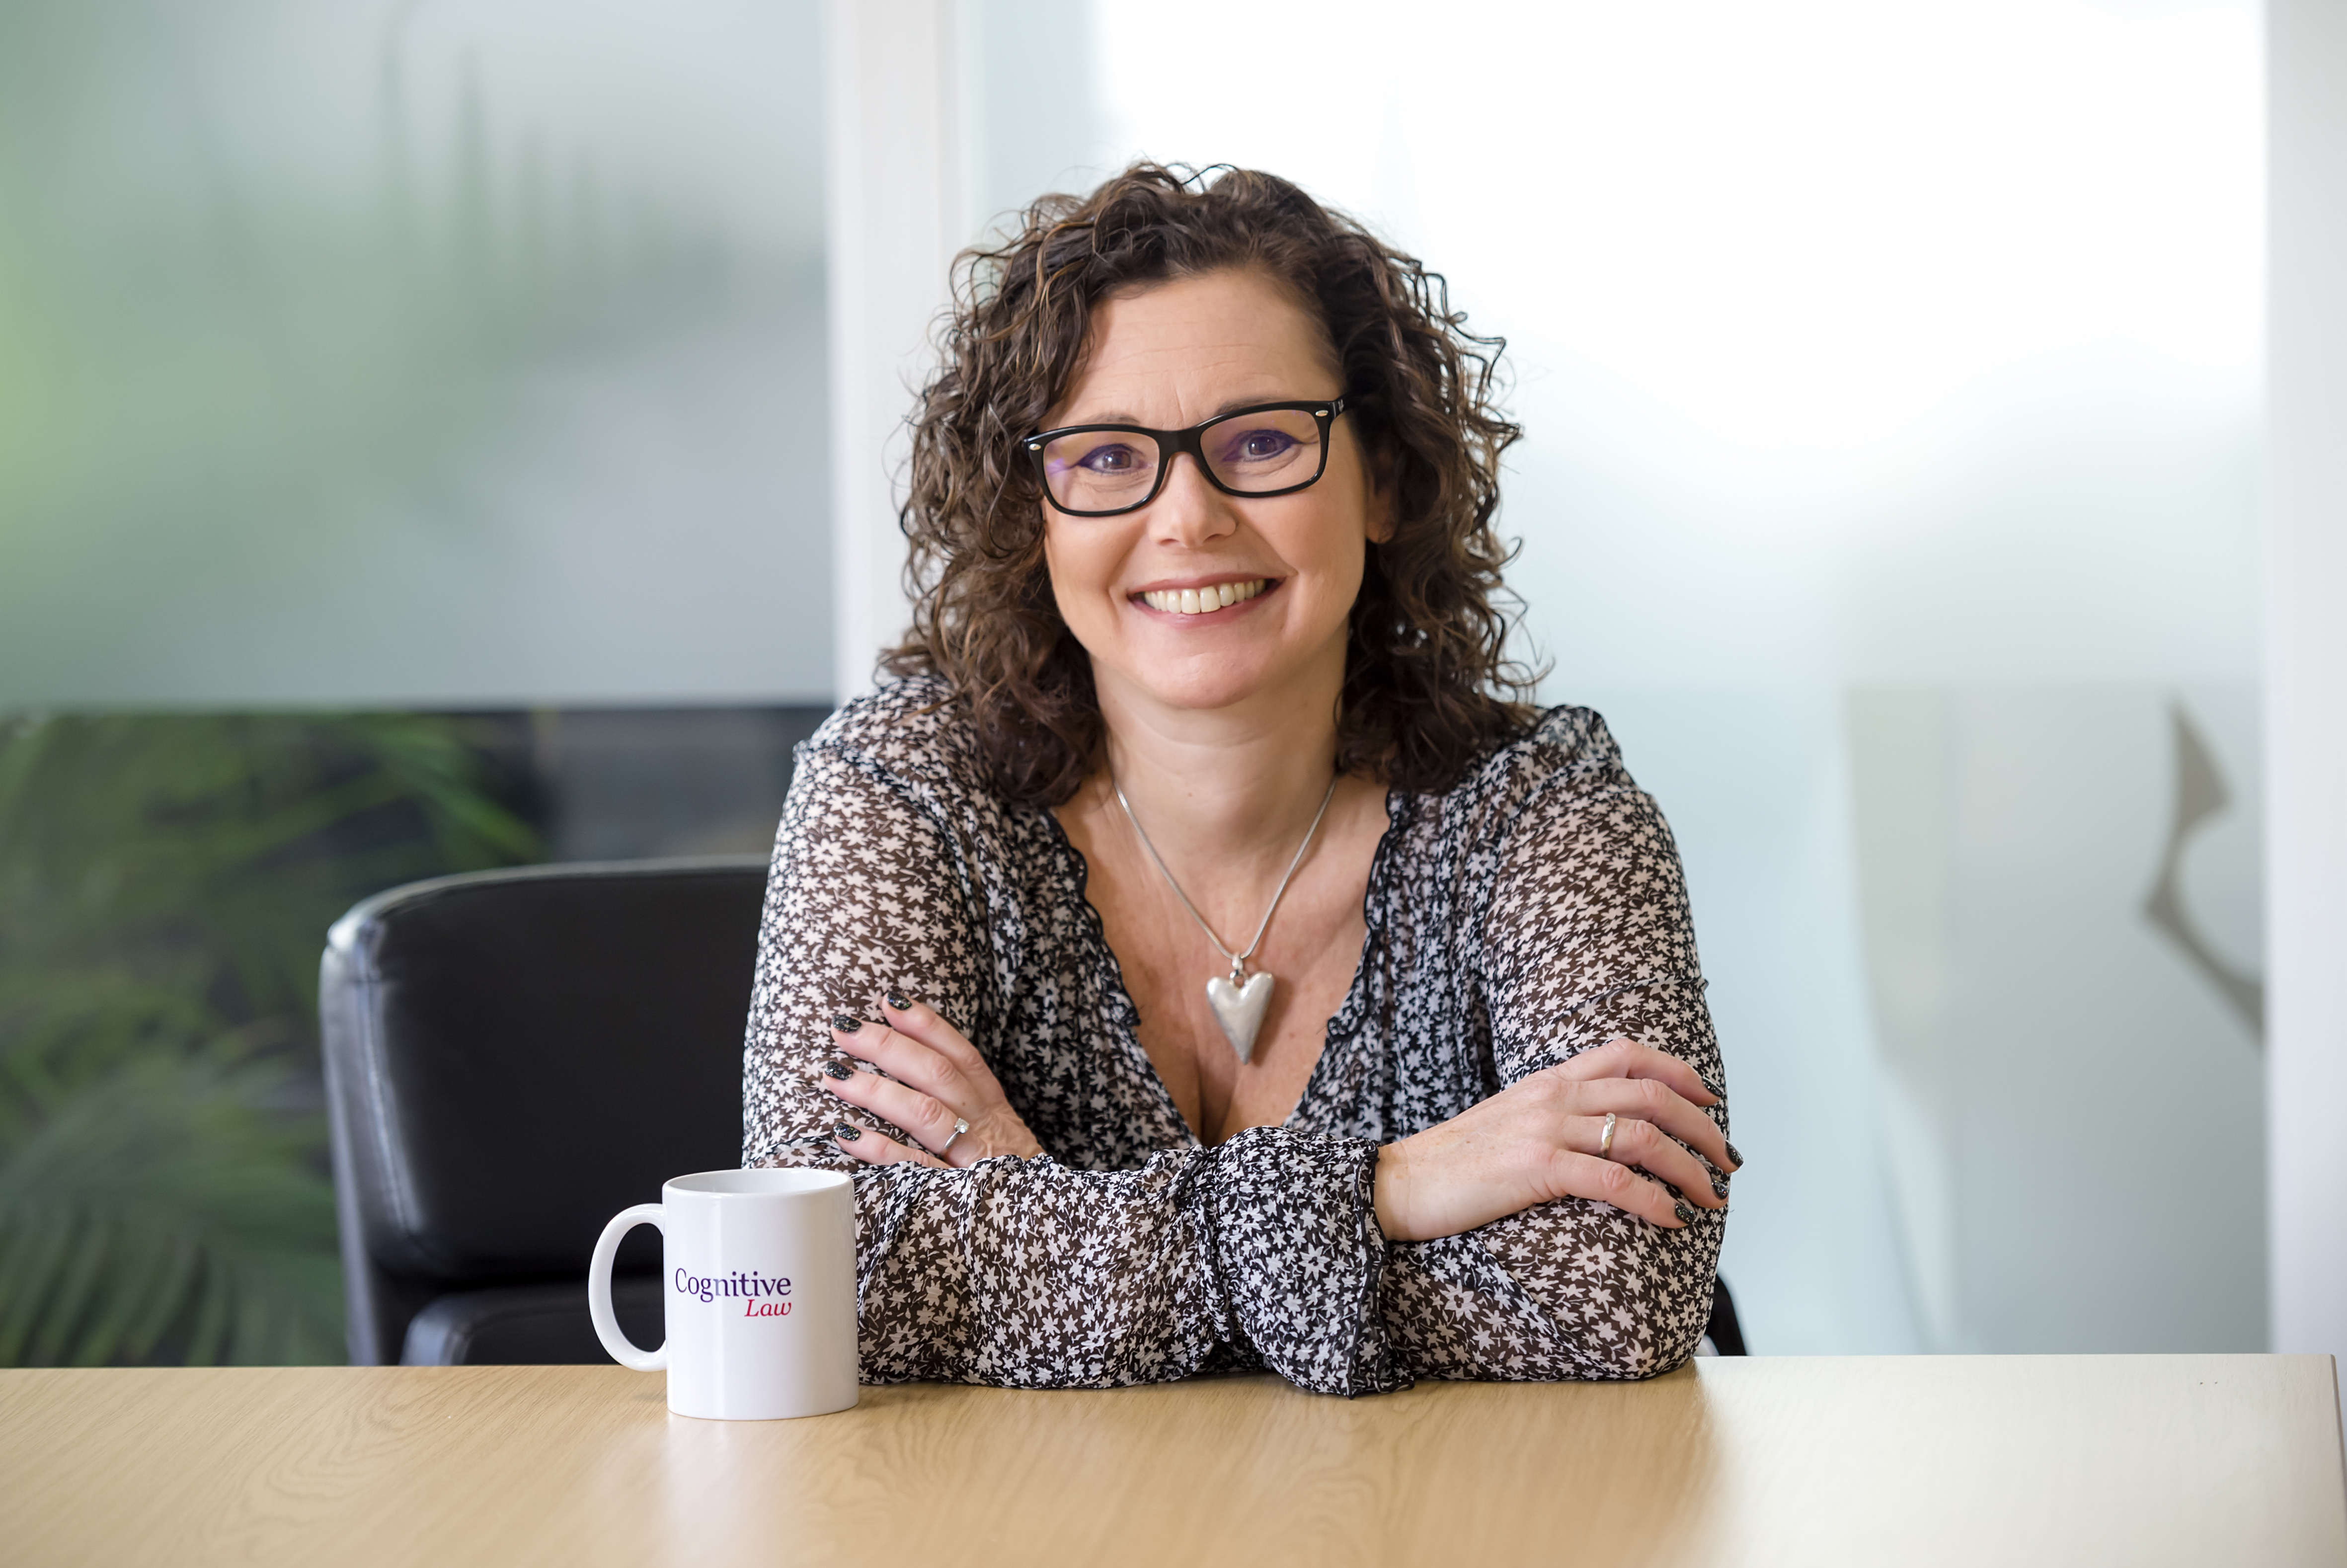 Lucy Tarrant, Solicitor and Managing Director of Cognitive Law